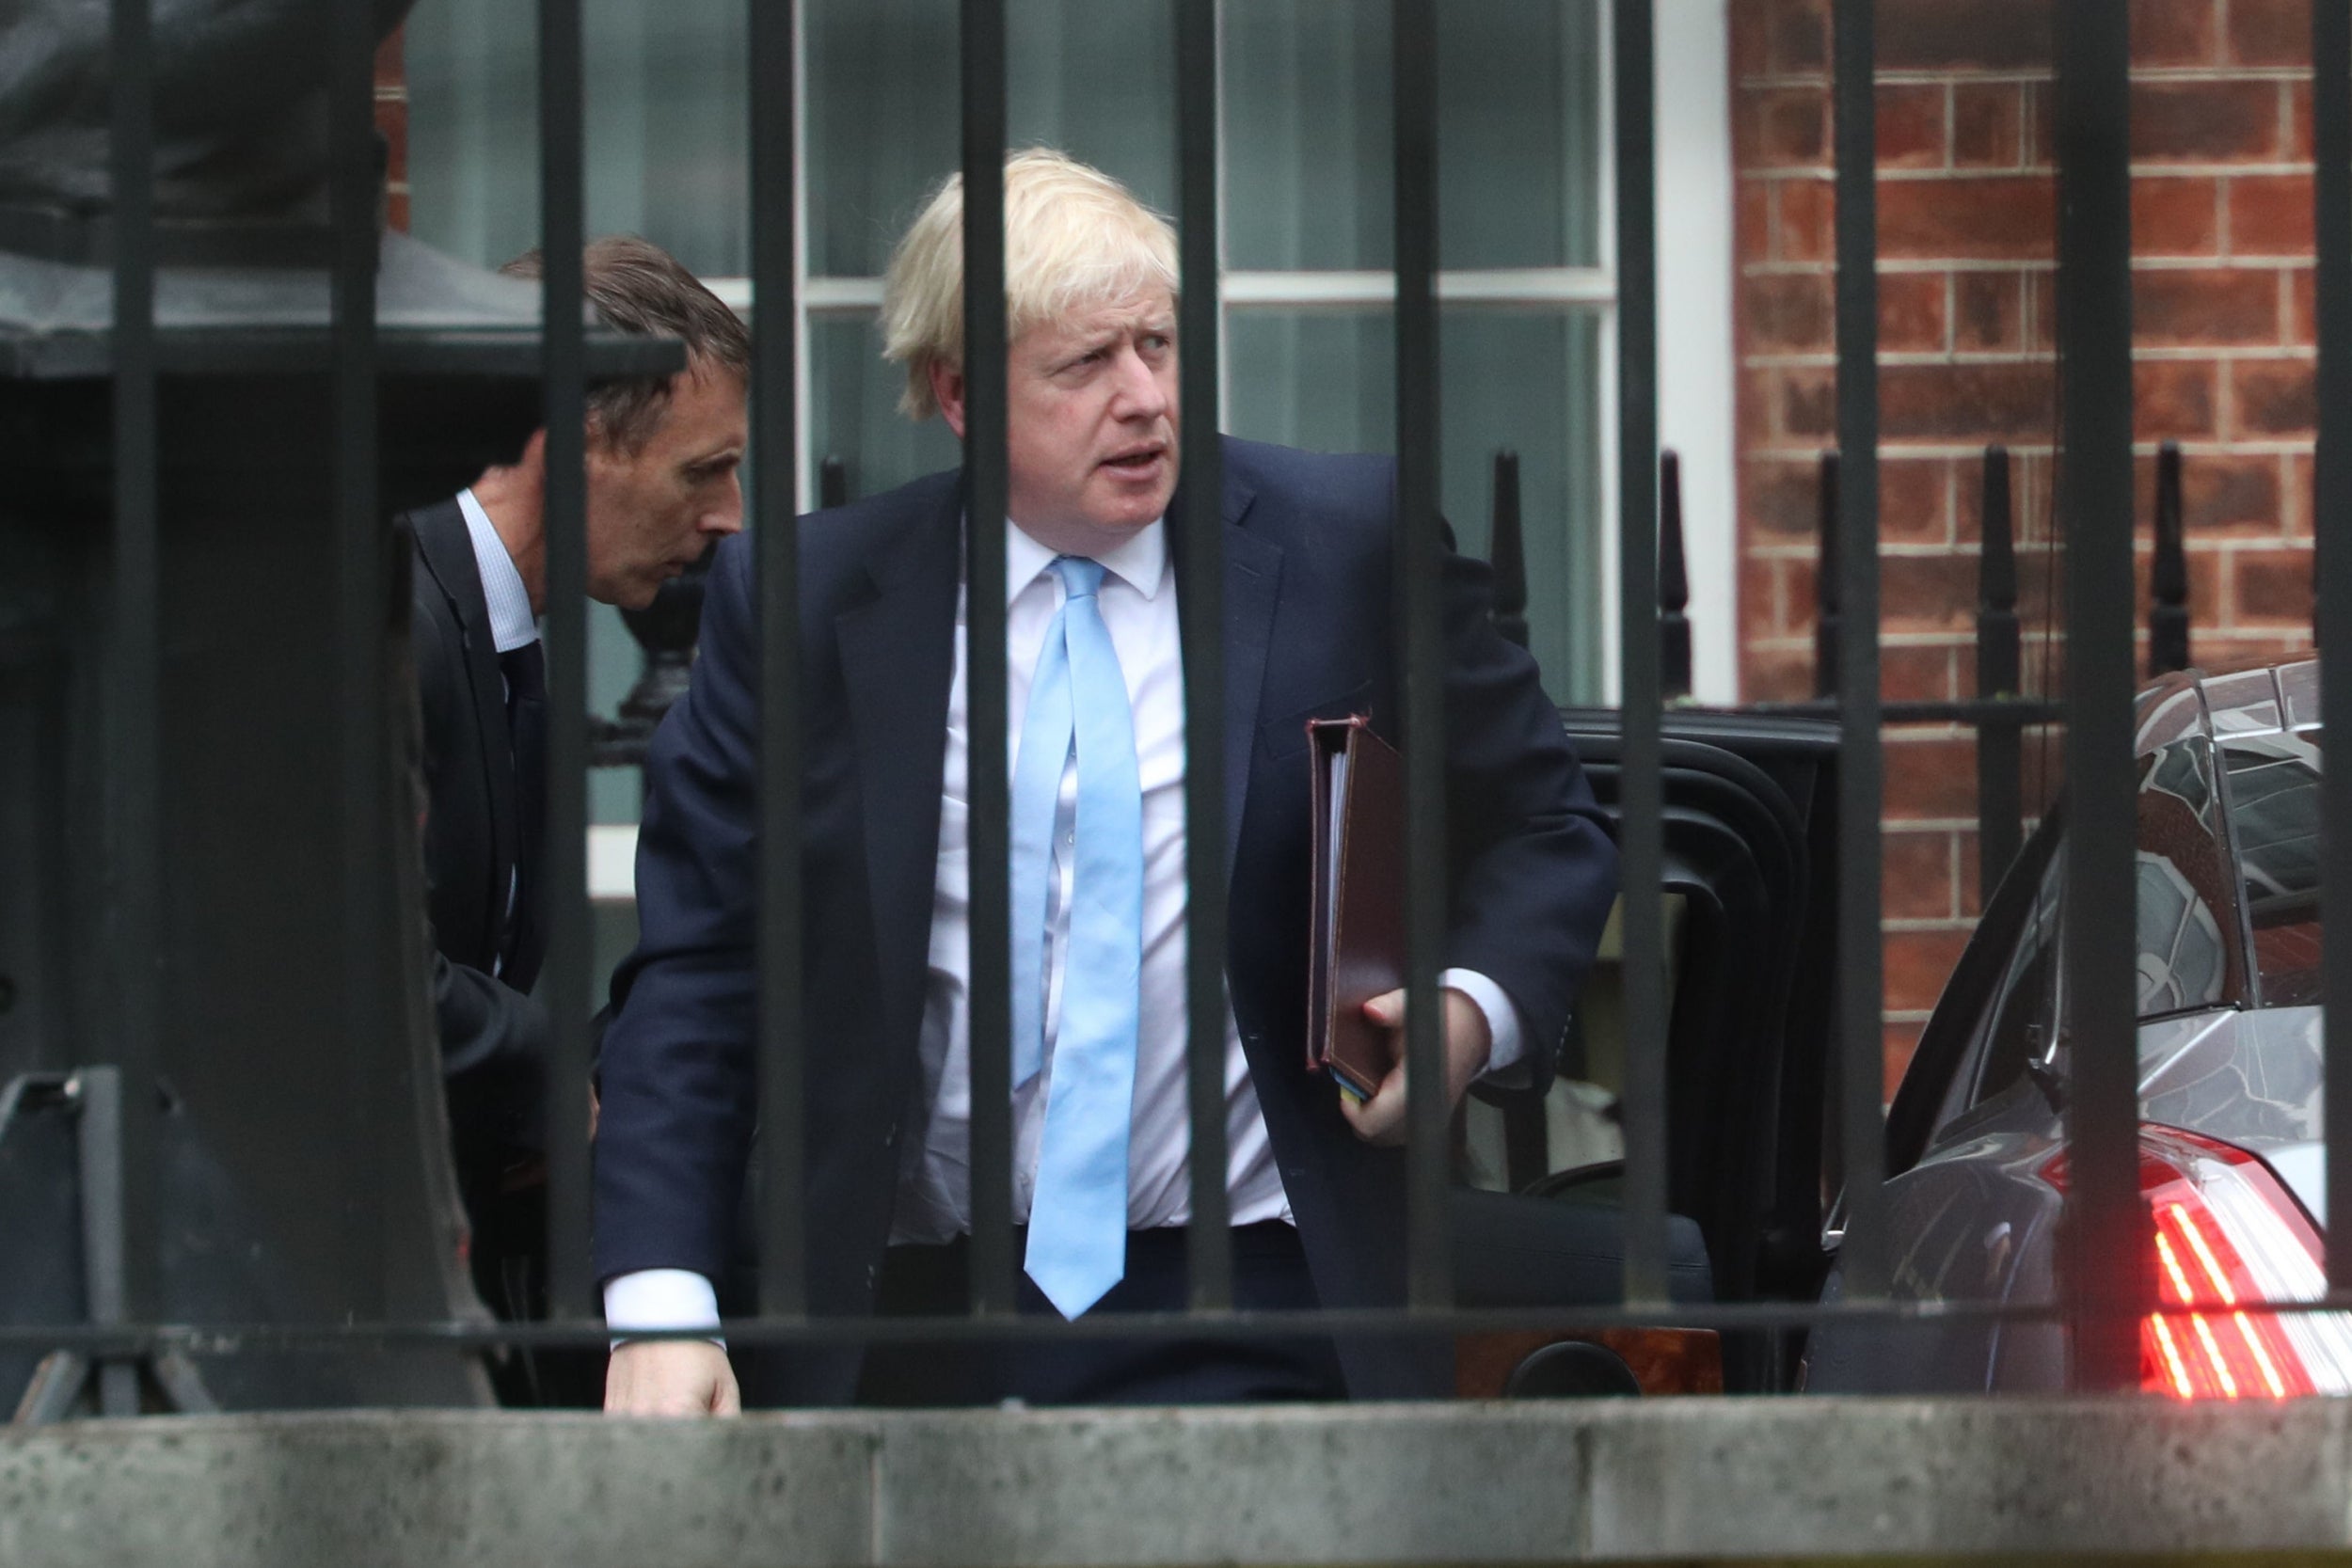 Boris Johnson arrives in Downing Street yesterday following his visit to Ireland